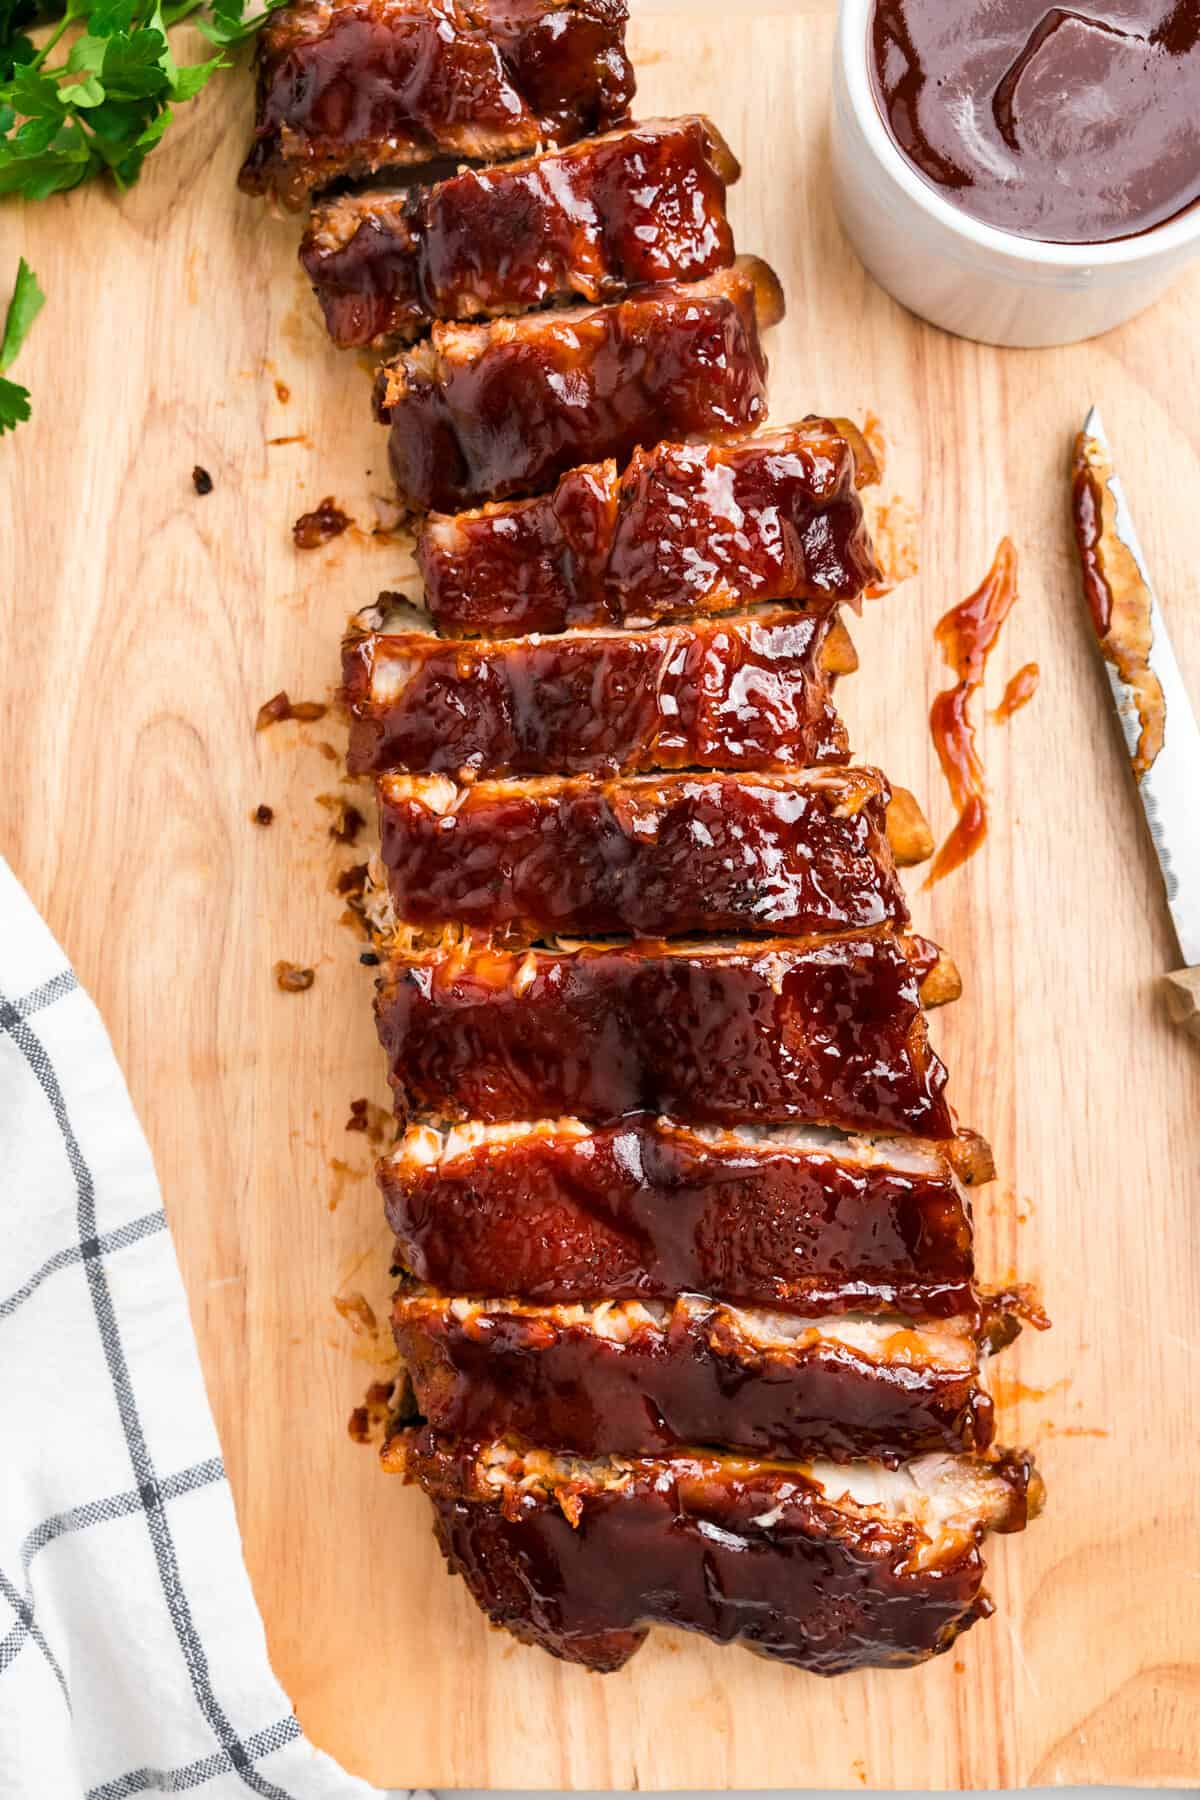 Sliced Oven Baked Pork Ribs on wooden cutting board